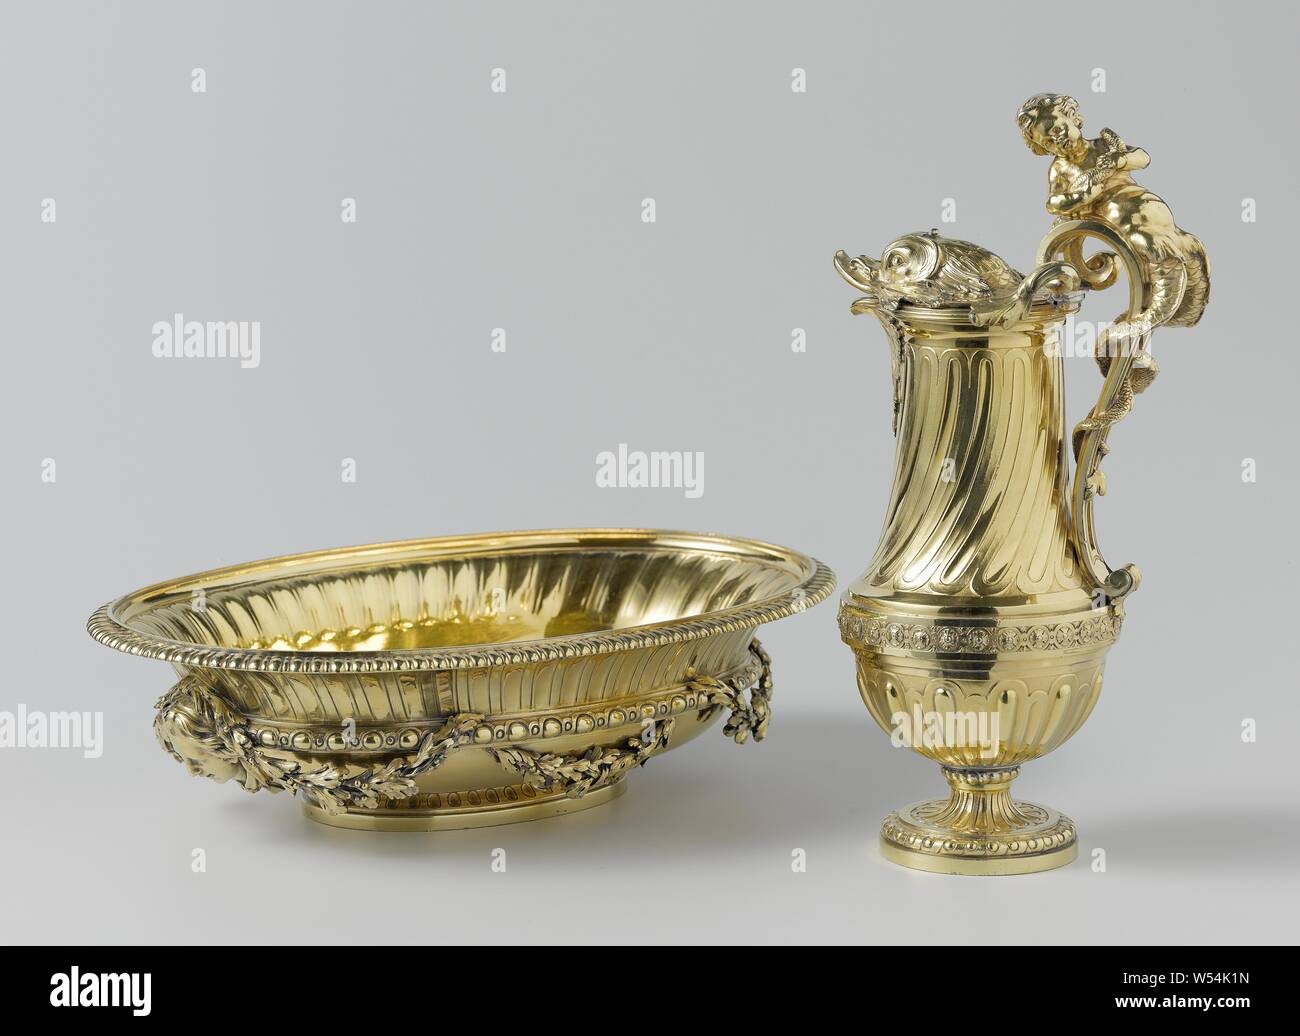 Ewer and basin, water jug, water jug of gilt silver. The jug rests on an ascending foot, has a convex underside with beamed godrons and, above a profile with rosettes, a high concave neck on which the godrons are twisted. The lid is shaped like the head of a dolphin. A crowning sea putto winds its double tail around the high rising ear, dolphin, ornament, Thomas Chancellier, Paris, 1765, silver (metal), gilding (material), gilding, h 35.0 cm × w 36.5 cm × d 24.5 cm w 15.8 cm × d 10.5 cm w 1792 Stock Photo